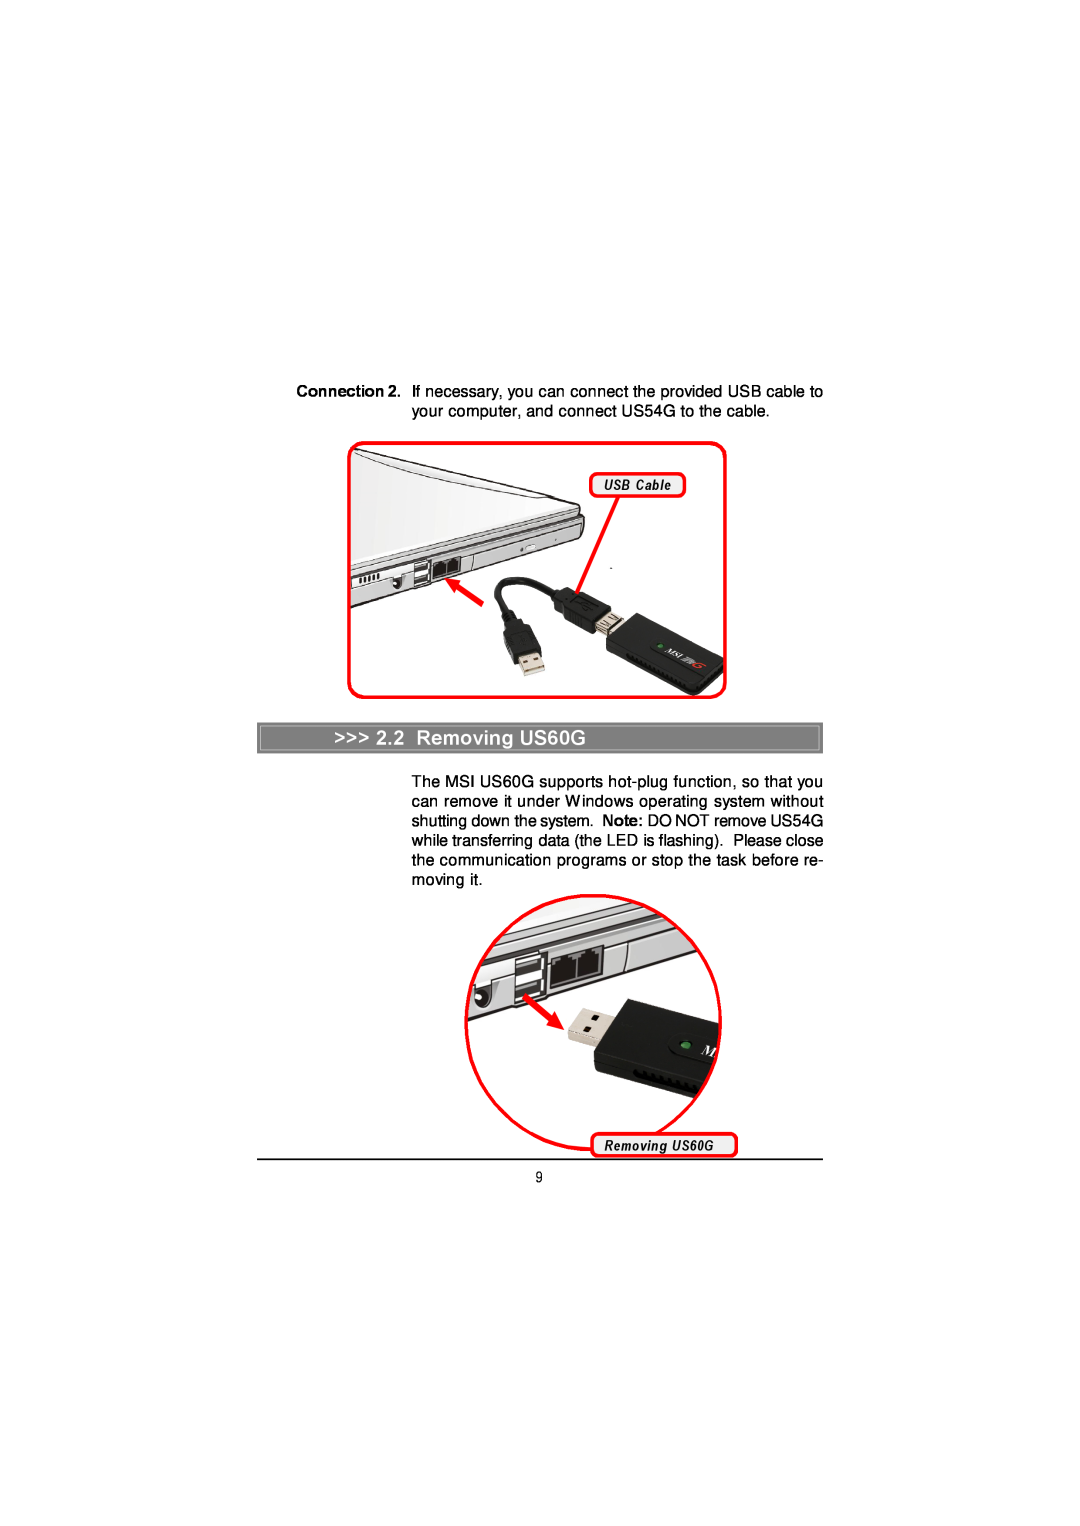 MSI manual Removing US60G, USB Cable 